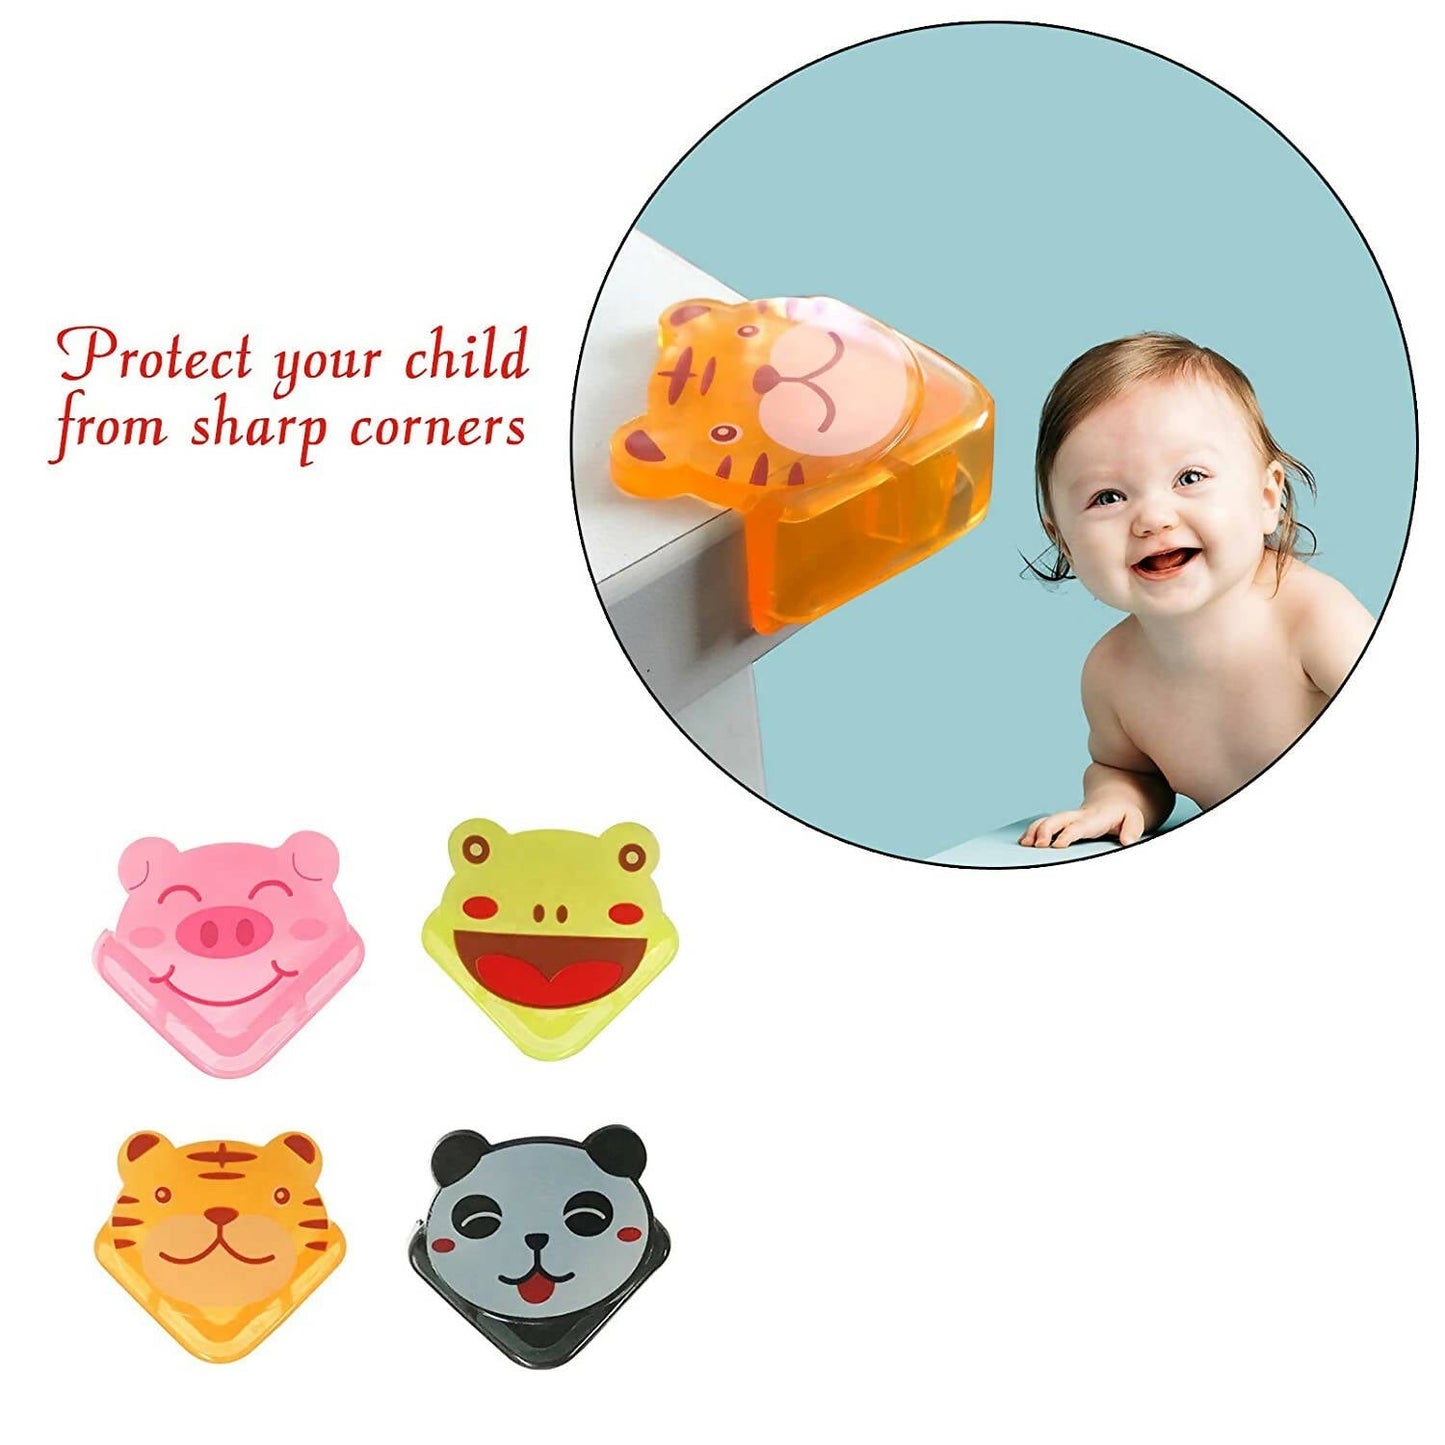 Safe-O-Kid Tiger Shaped, Compact Corner Safety For Sharp Corners, Yellow